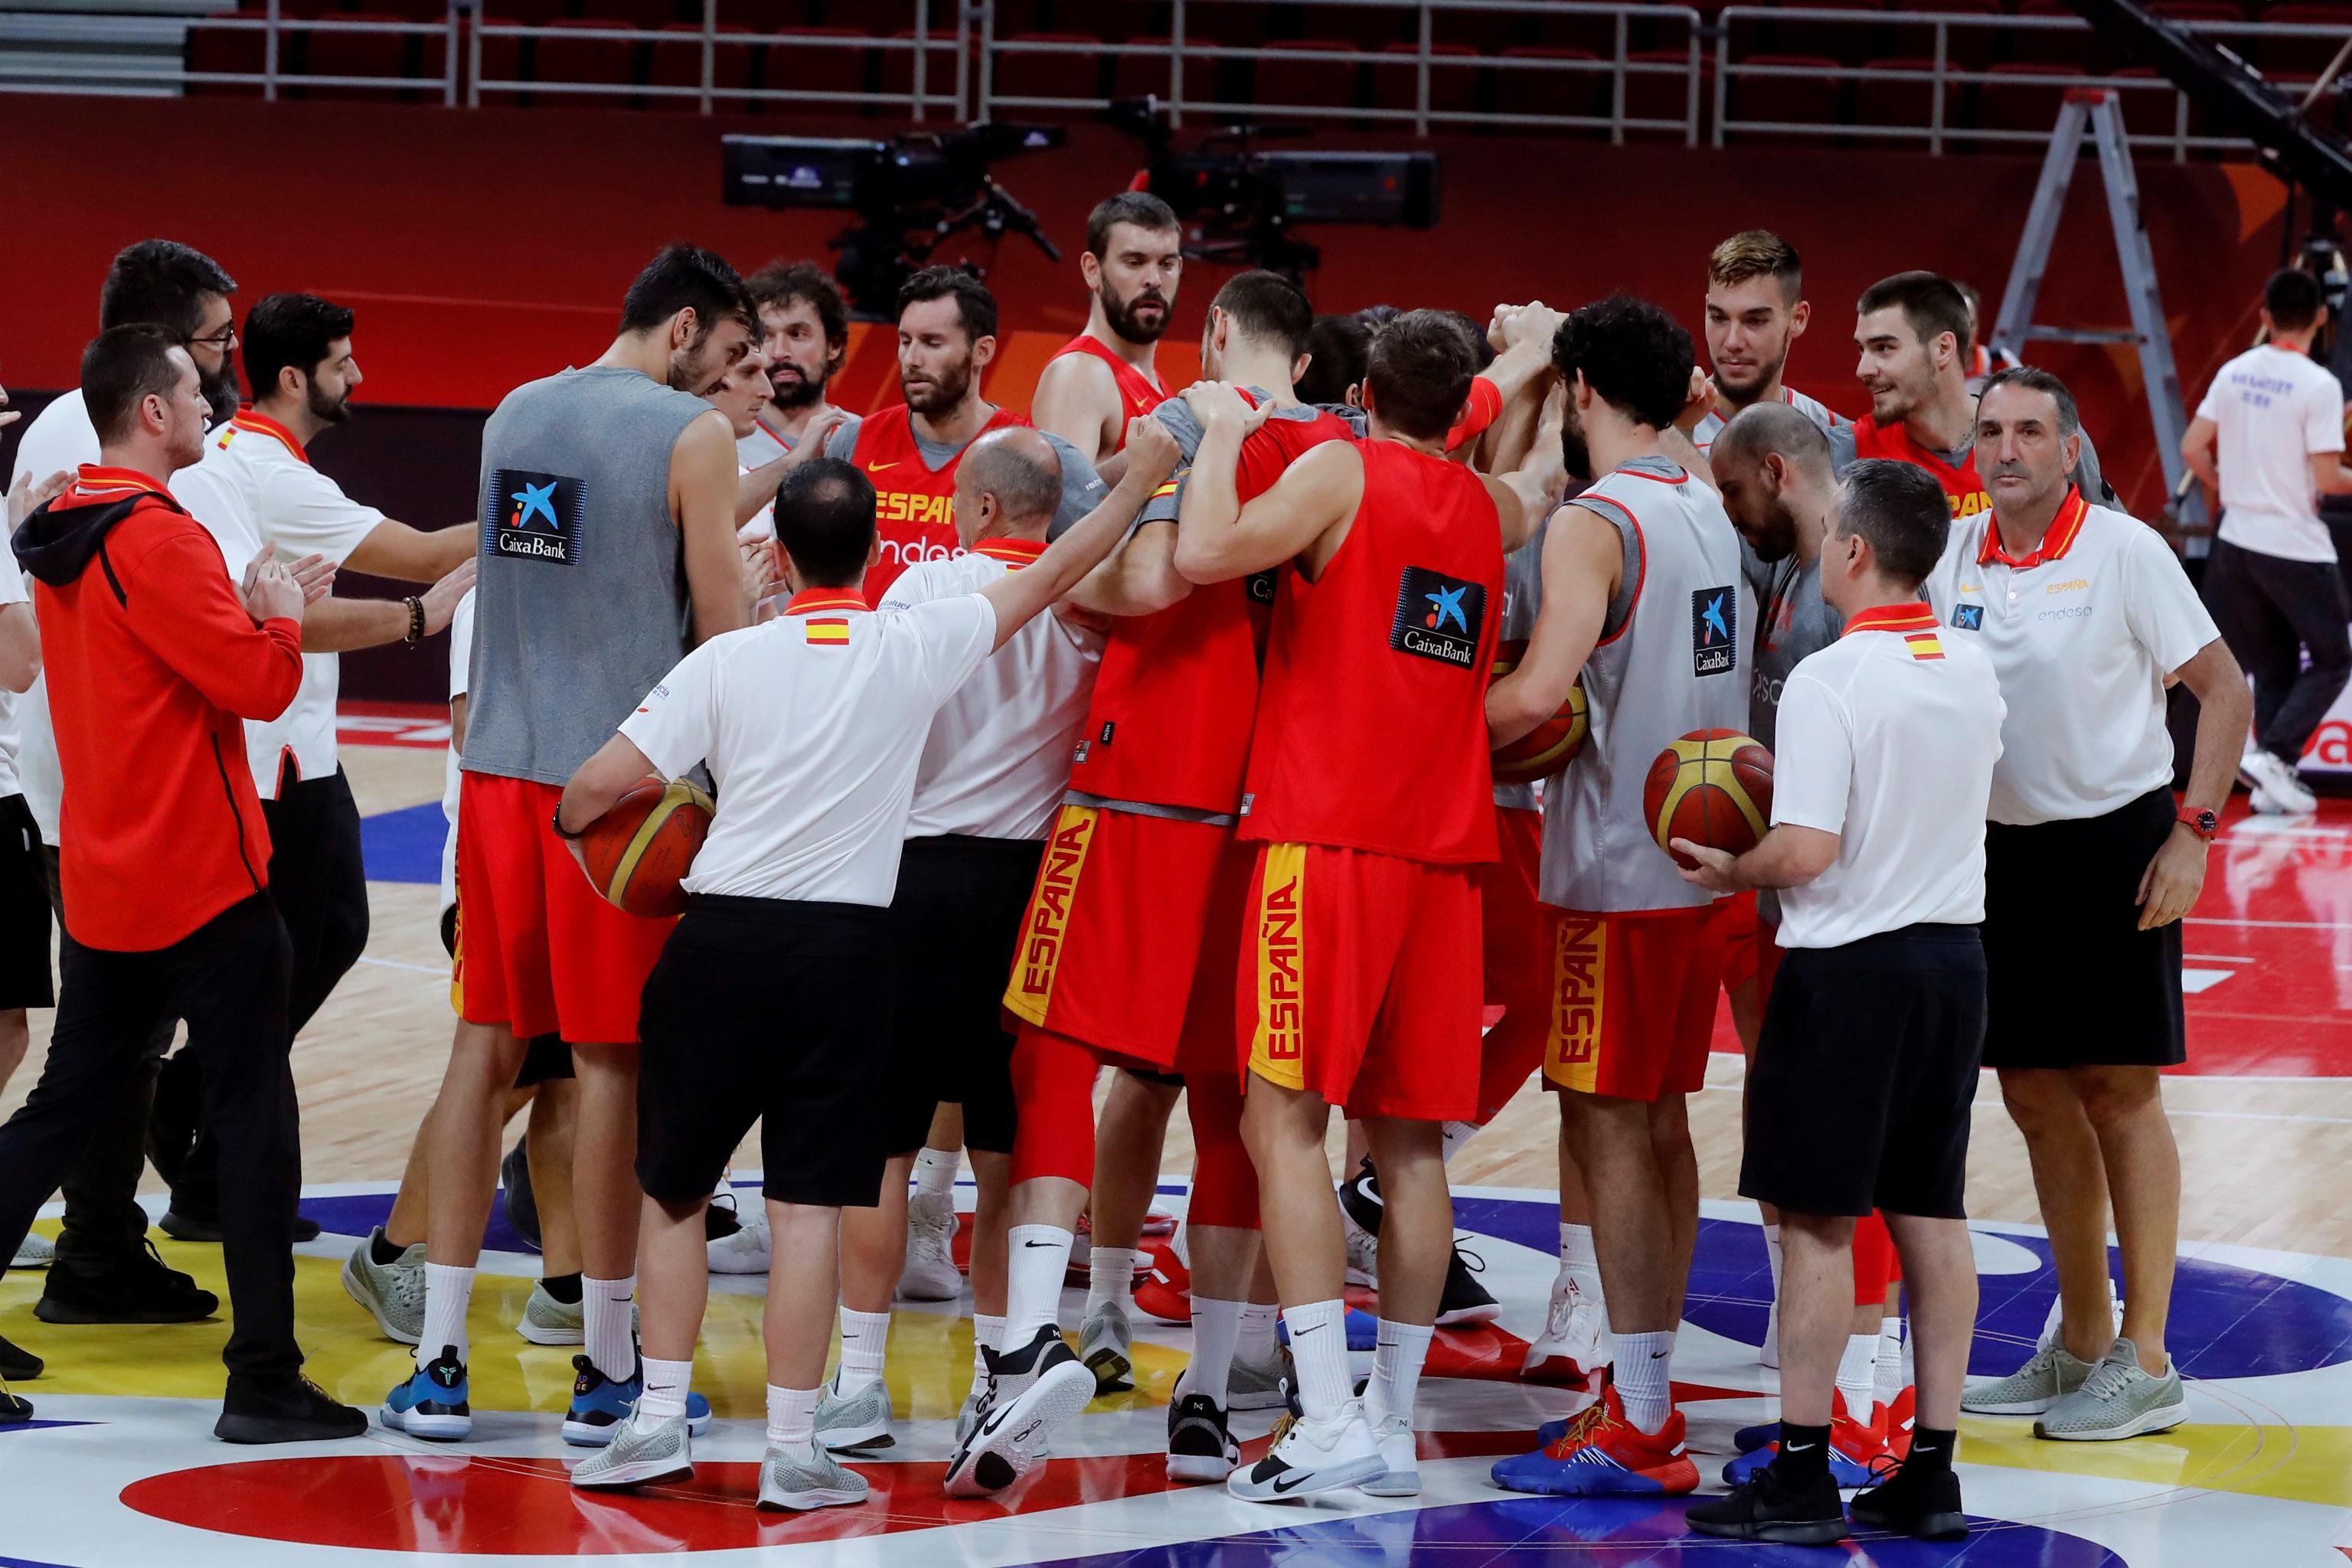 epa07837828 Spain's players attend a training session of the Spanish national basketball team in Beijing, China, 12 September 2019. Spain will face Australia in their FIBA Basketball World Cup 2019 semi final match on 13 September 2019.  EPA/Juan Carlos Hidalgo